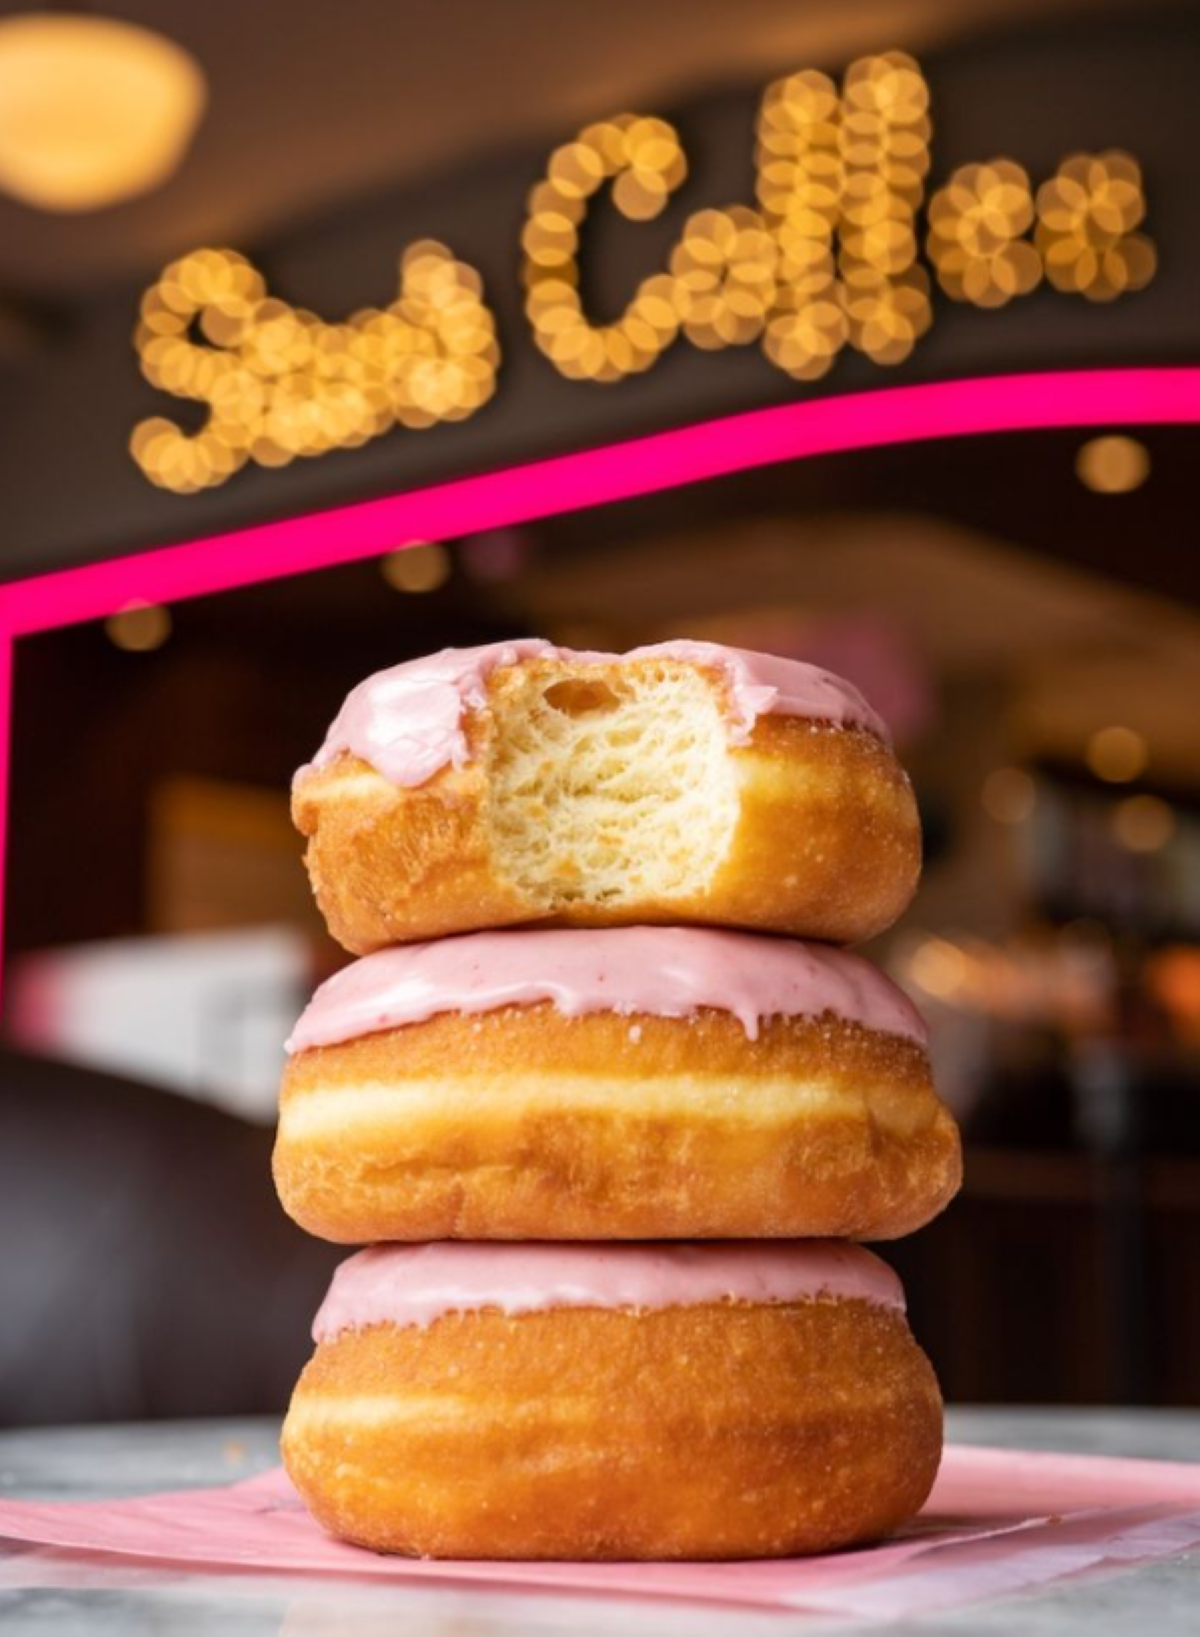 $2 Donuts on 2/22/22 at Our Chicago Donut Shops, Stan's Donuts